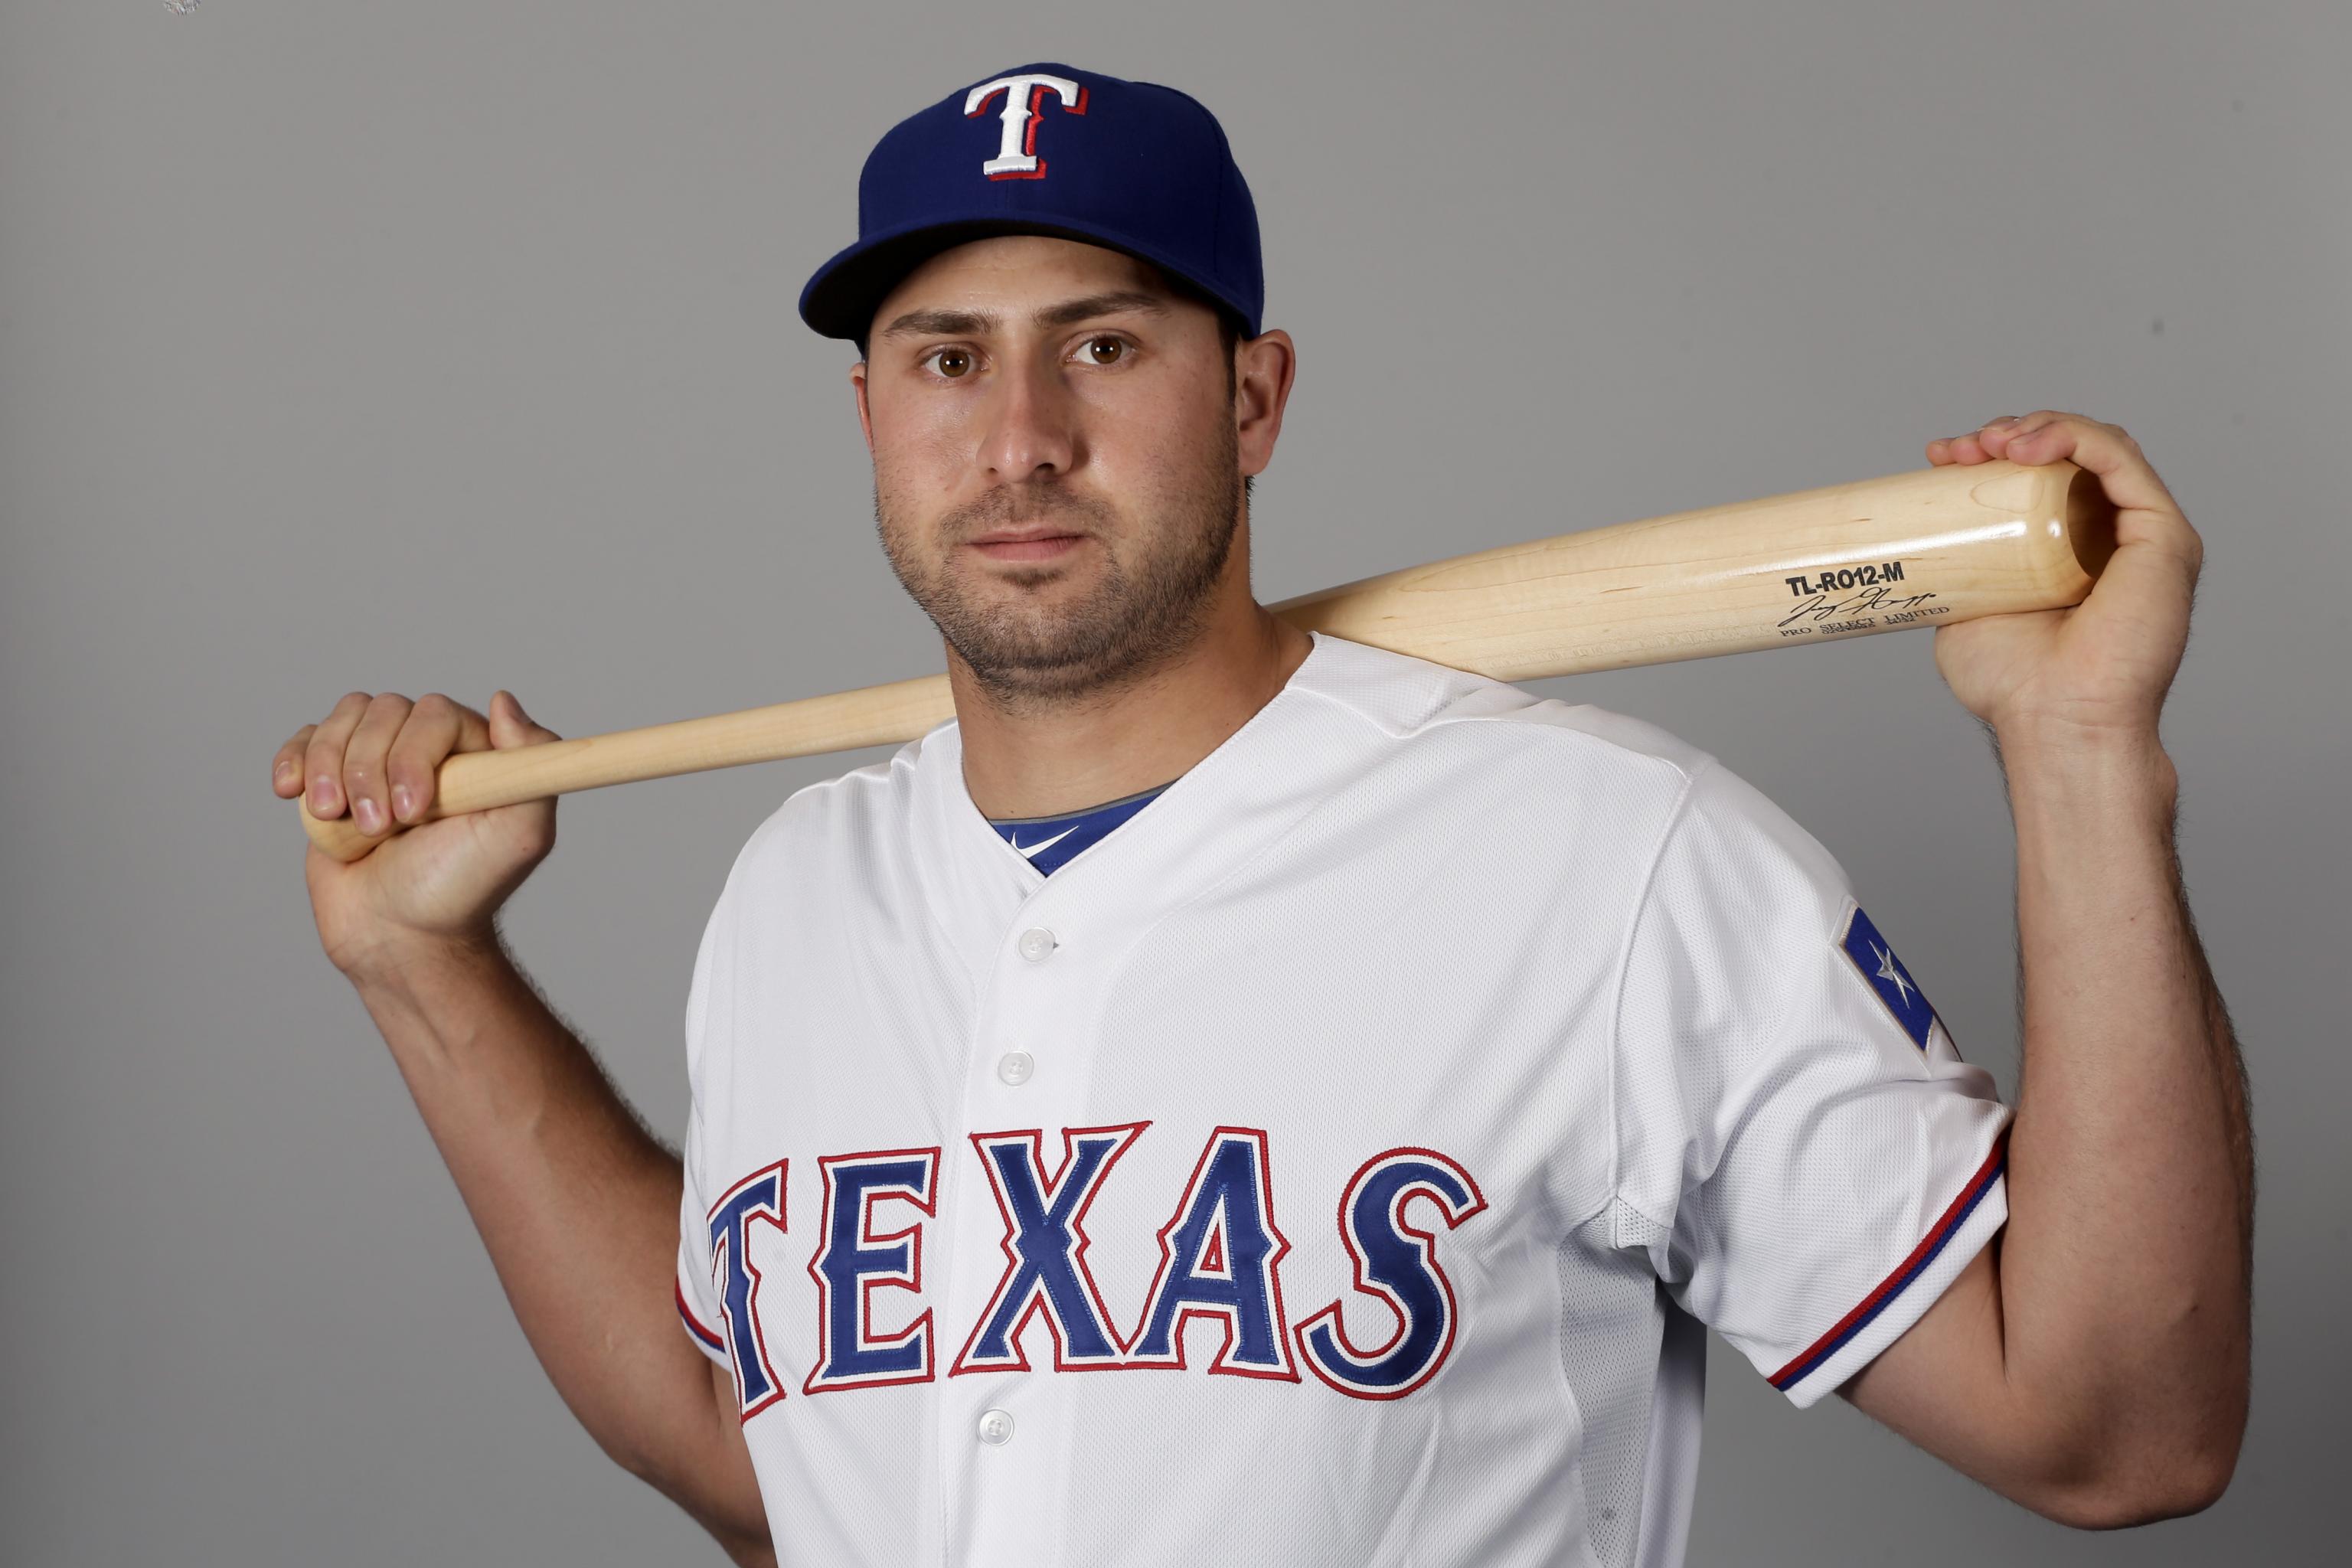 This is a 2016 photo of Joey Gallo of the Texas Rangers baseball